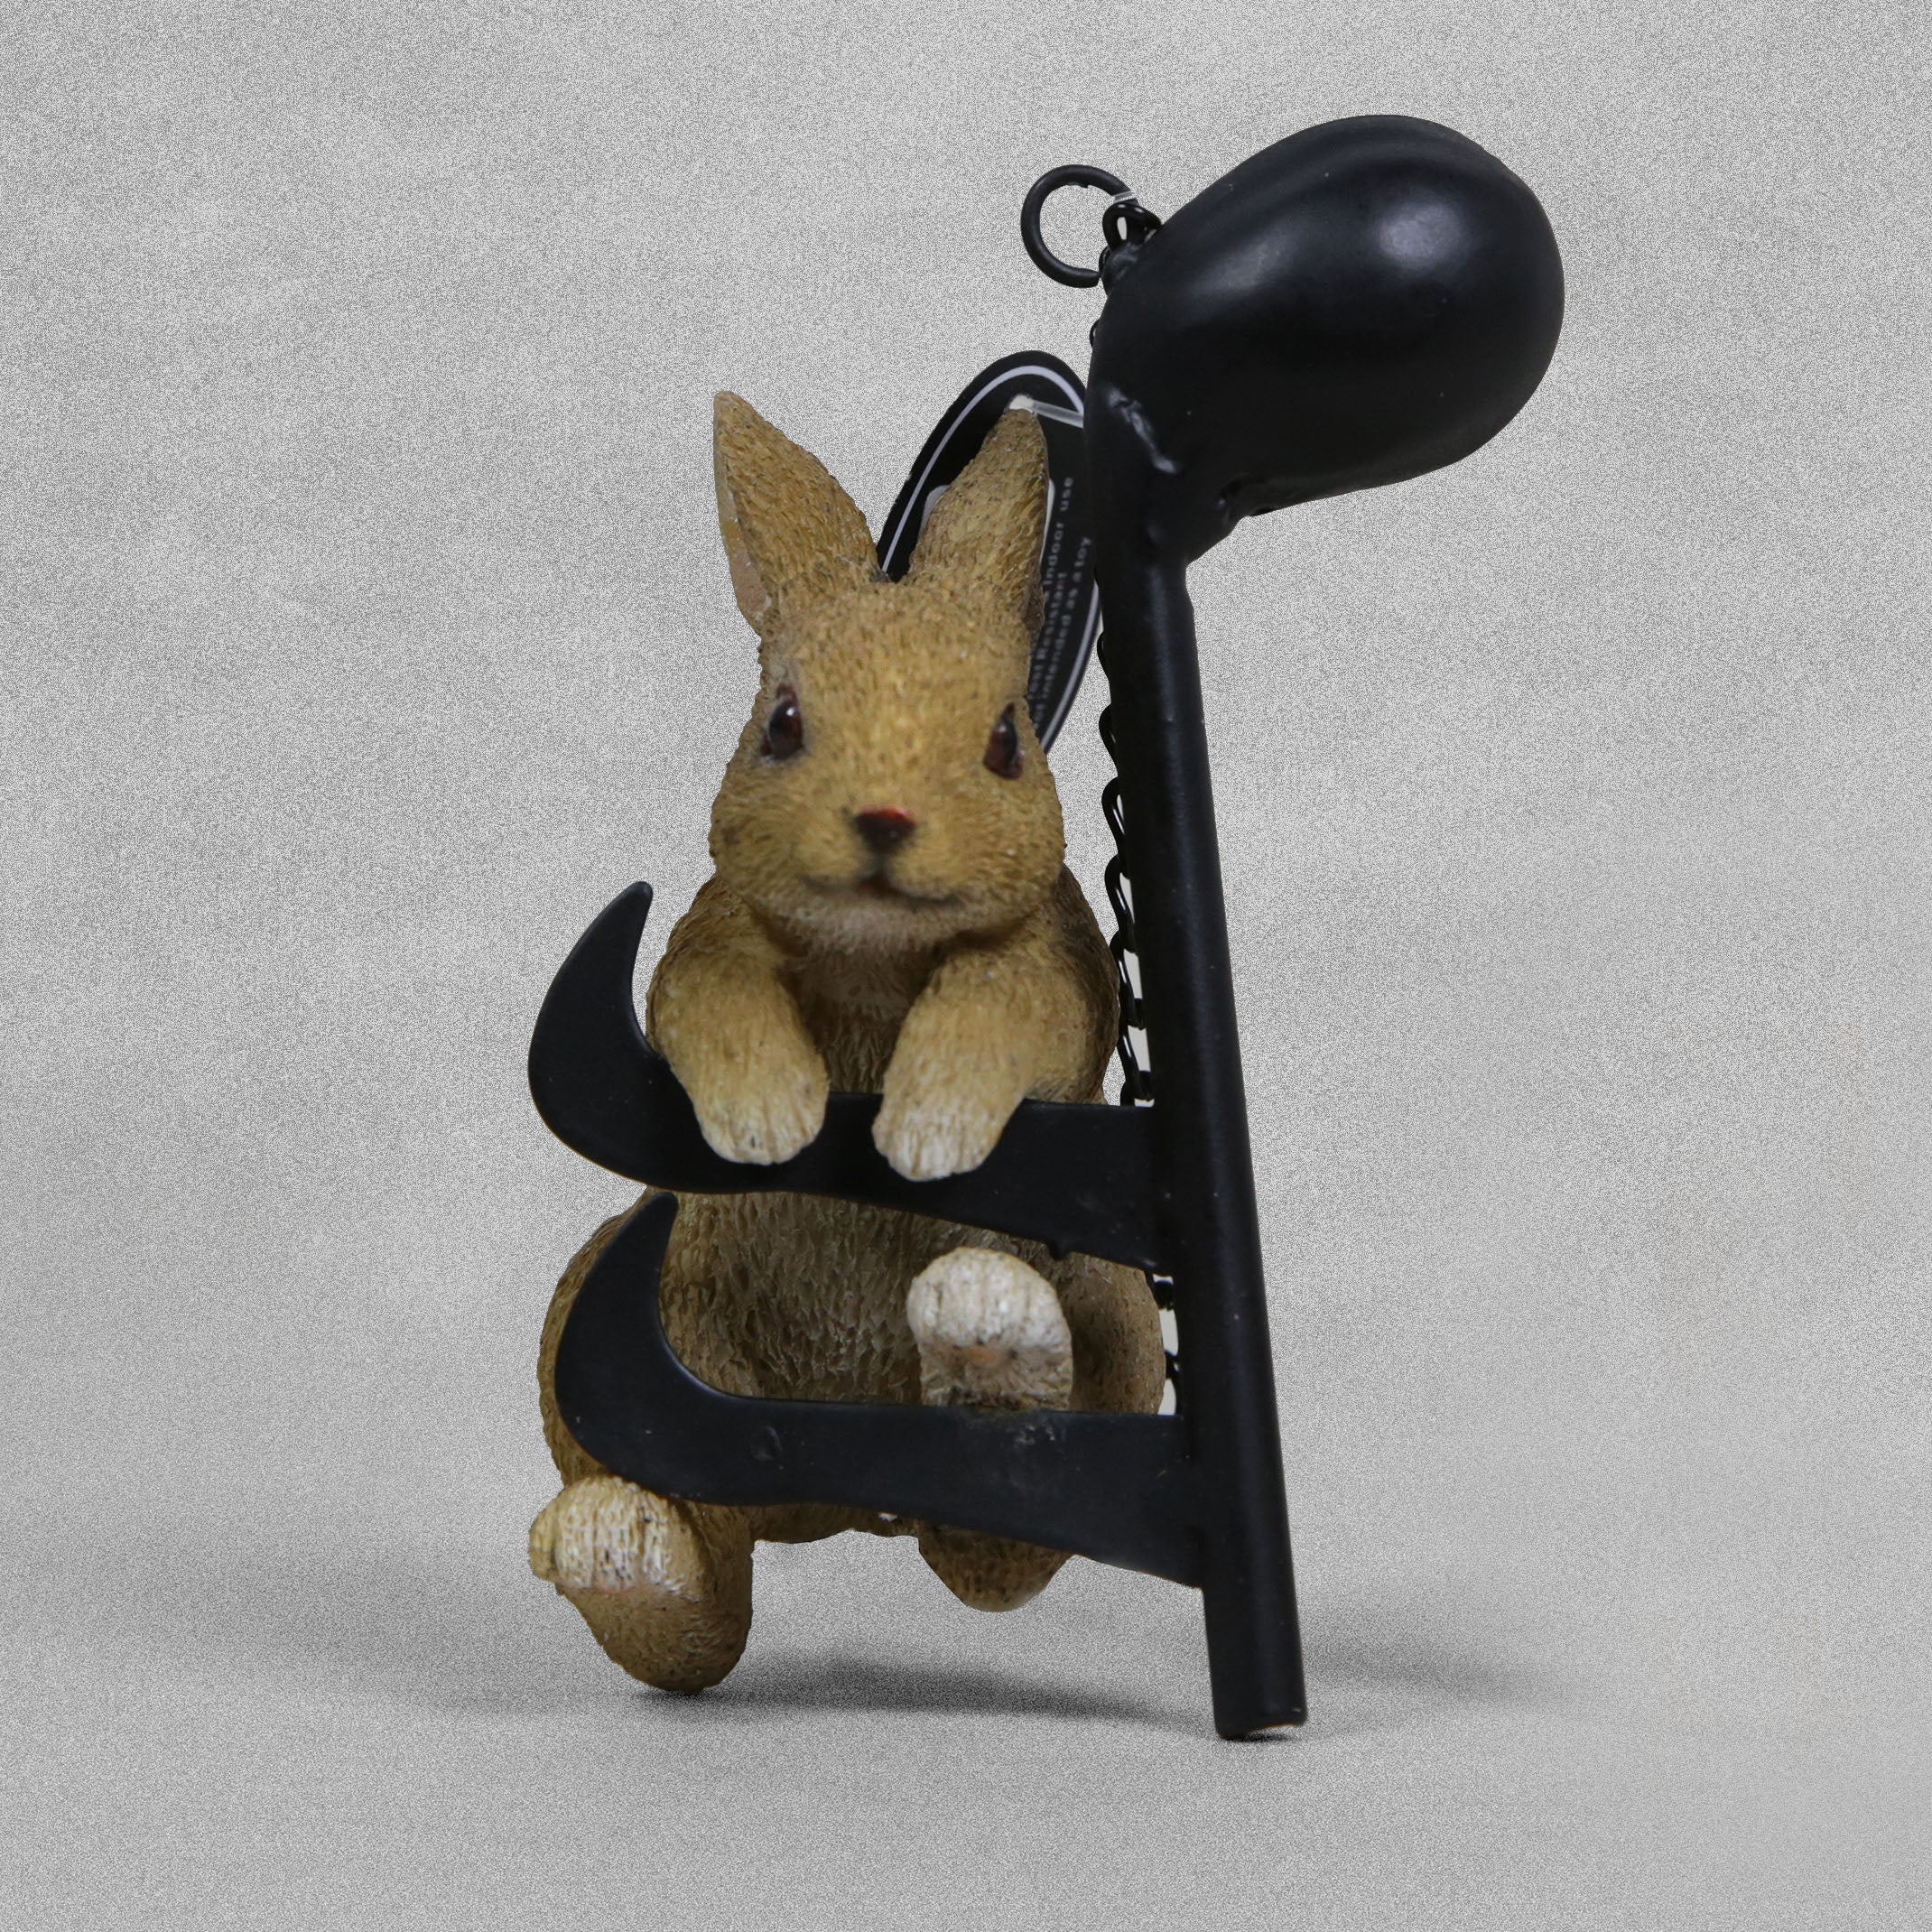 Vivid Arts Hanging Ornament - Rabbit on a Musical Note